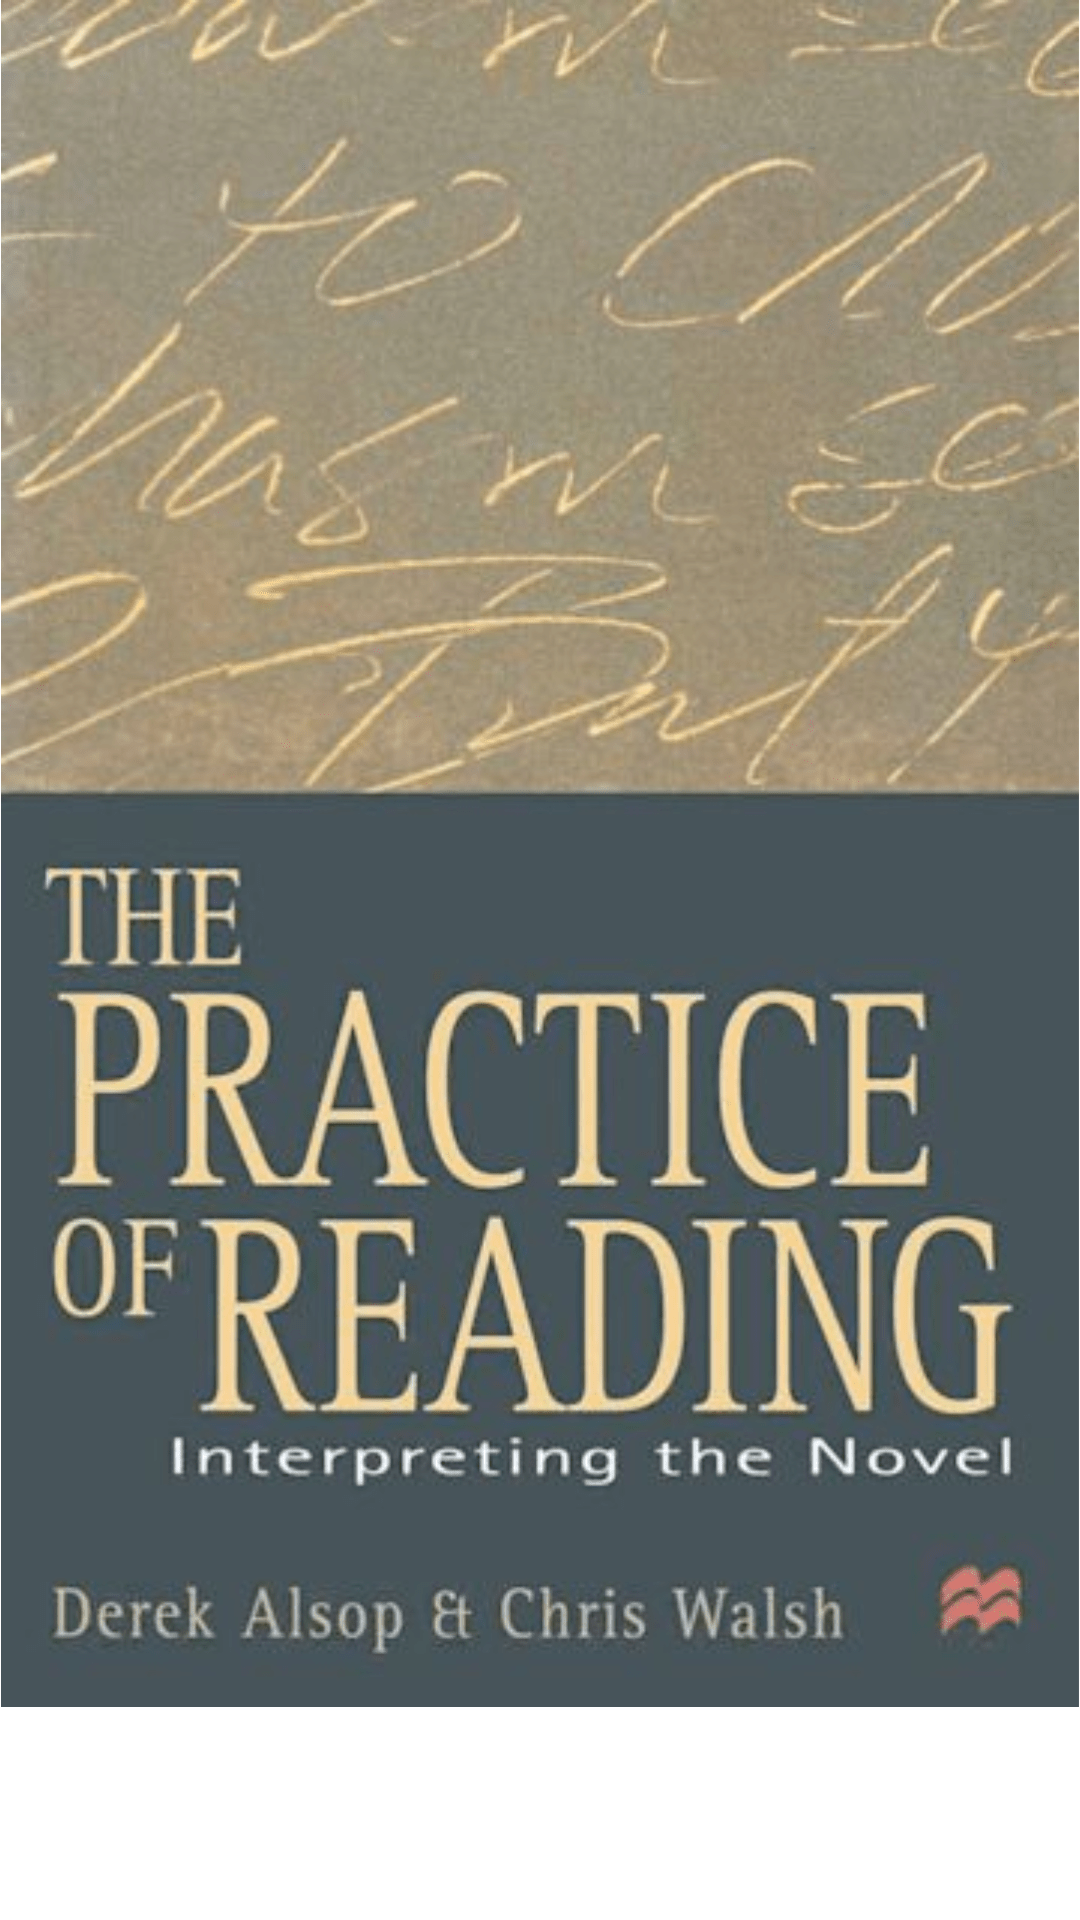 The Practice of Reading: Interpreting the Novel